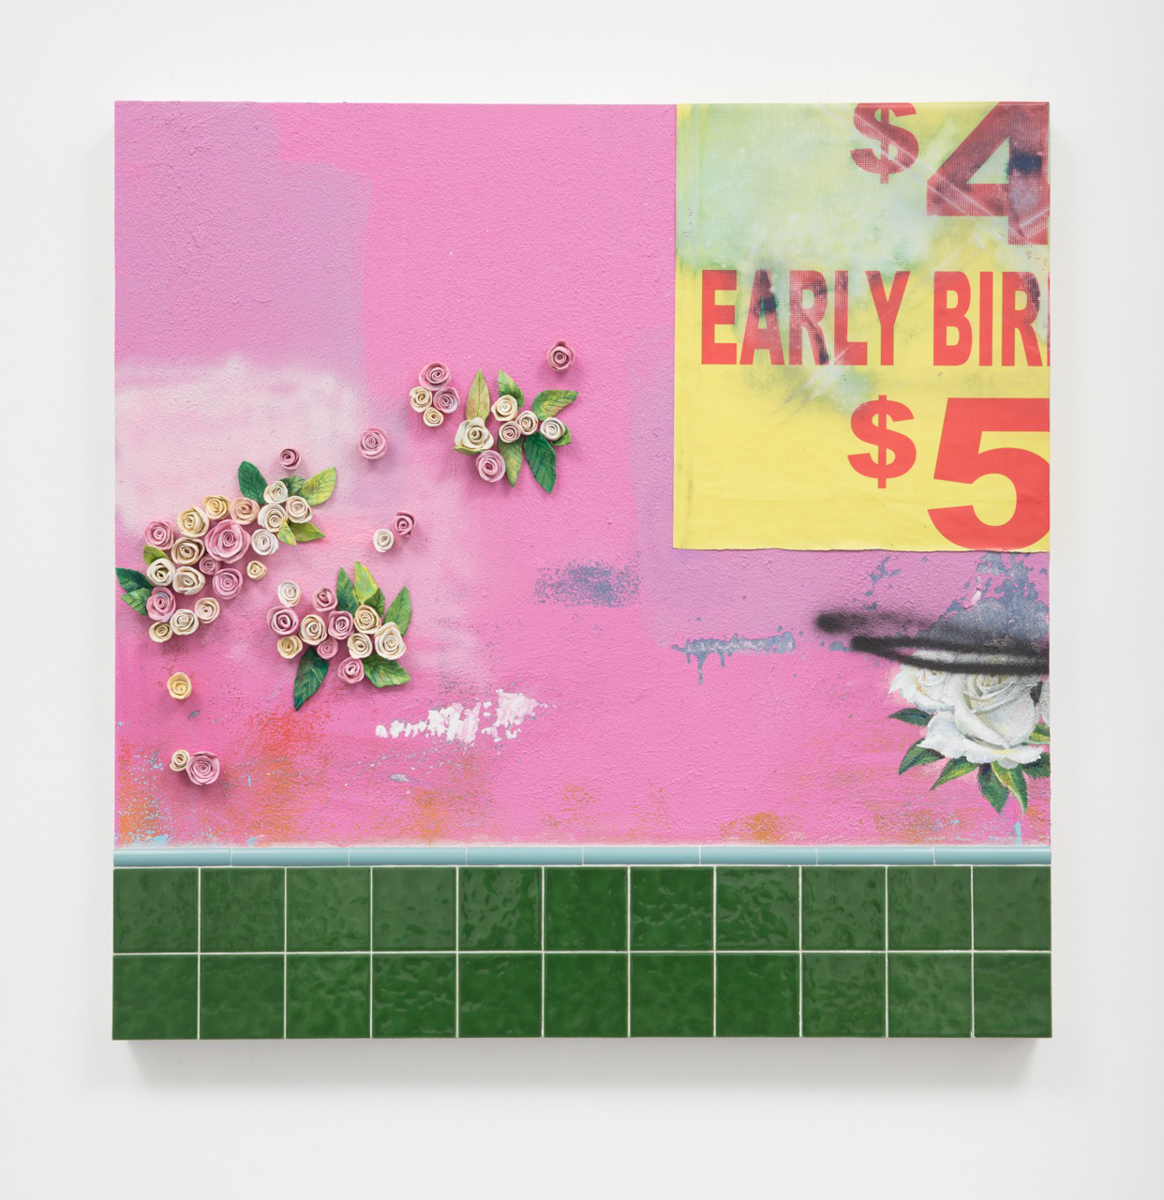 Patrick Martinez, Chinatown Flowers (early bird), 2017. Ceramic, found banner tarp, ceramic tile and mixed media on panel with wall stucco. 48 × 48 in. Courtesy of the artist and Charlie James Gallery, Los Angeles.  Photo by Michael Underwood.